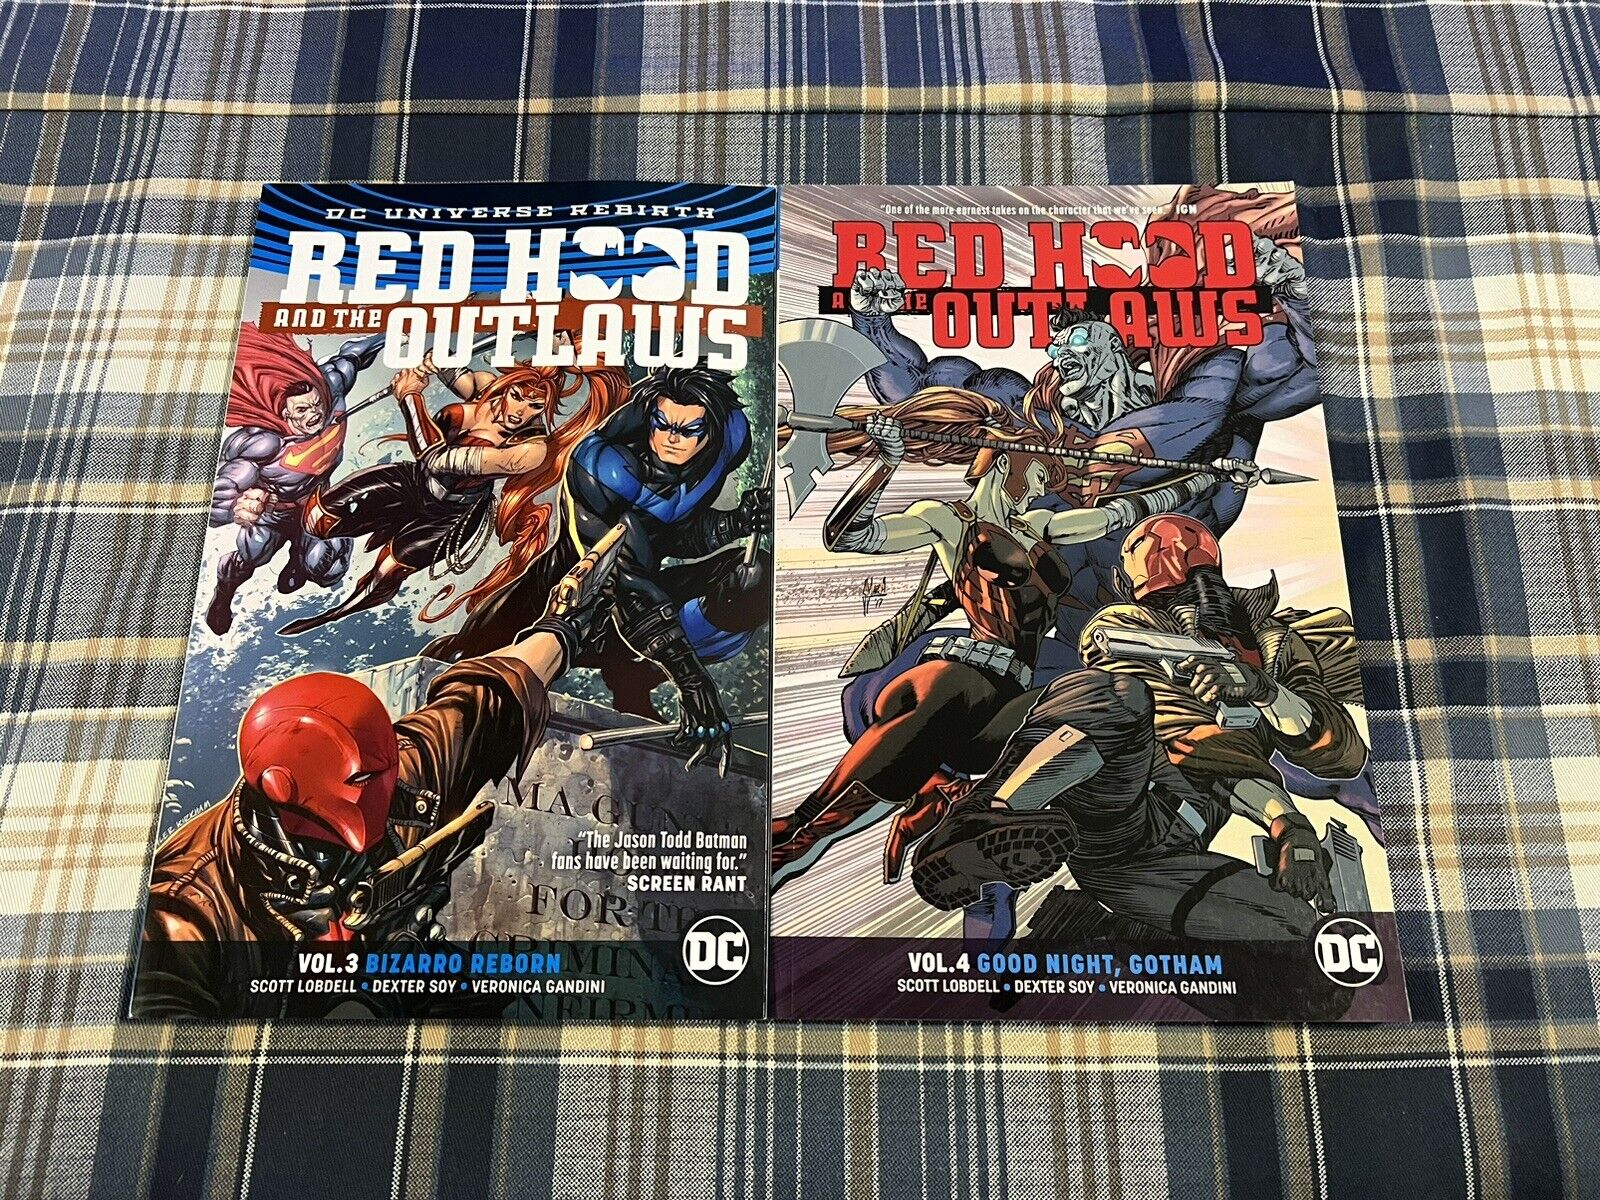 Red Hood and the Outlaws Vol 3 4 Good Night Gotham TPB Lot